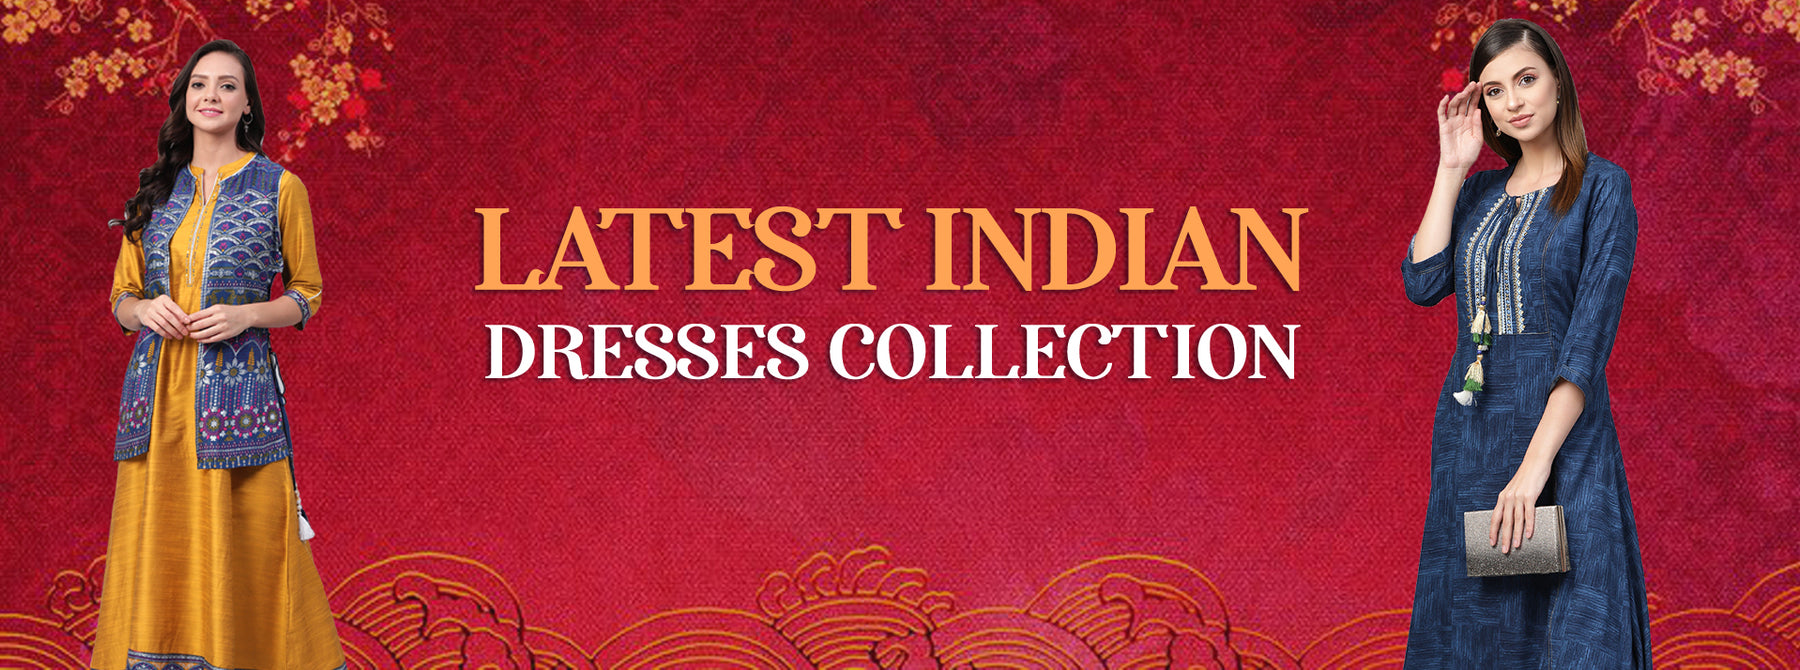 Latest Indian Dresses Collection That You Cannot Afford to Miss